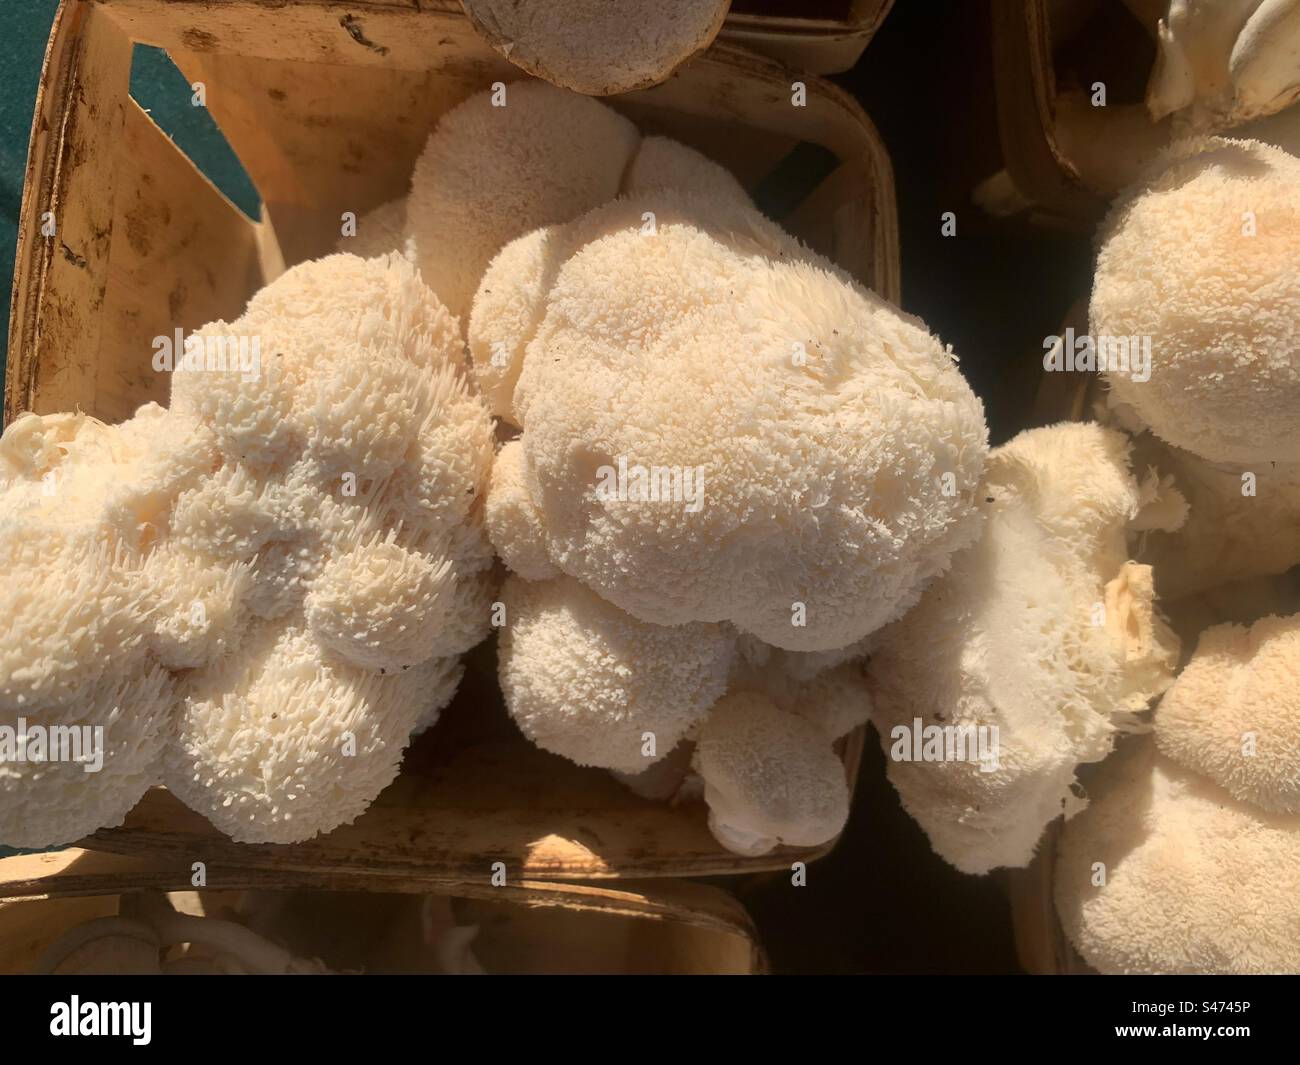 Super rare and nutritious lions mane mushrooms for sale. Stock Photo